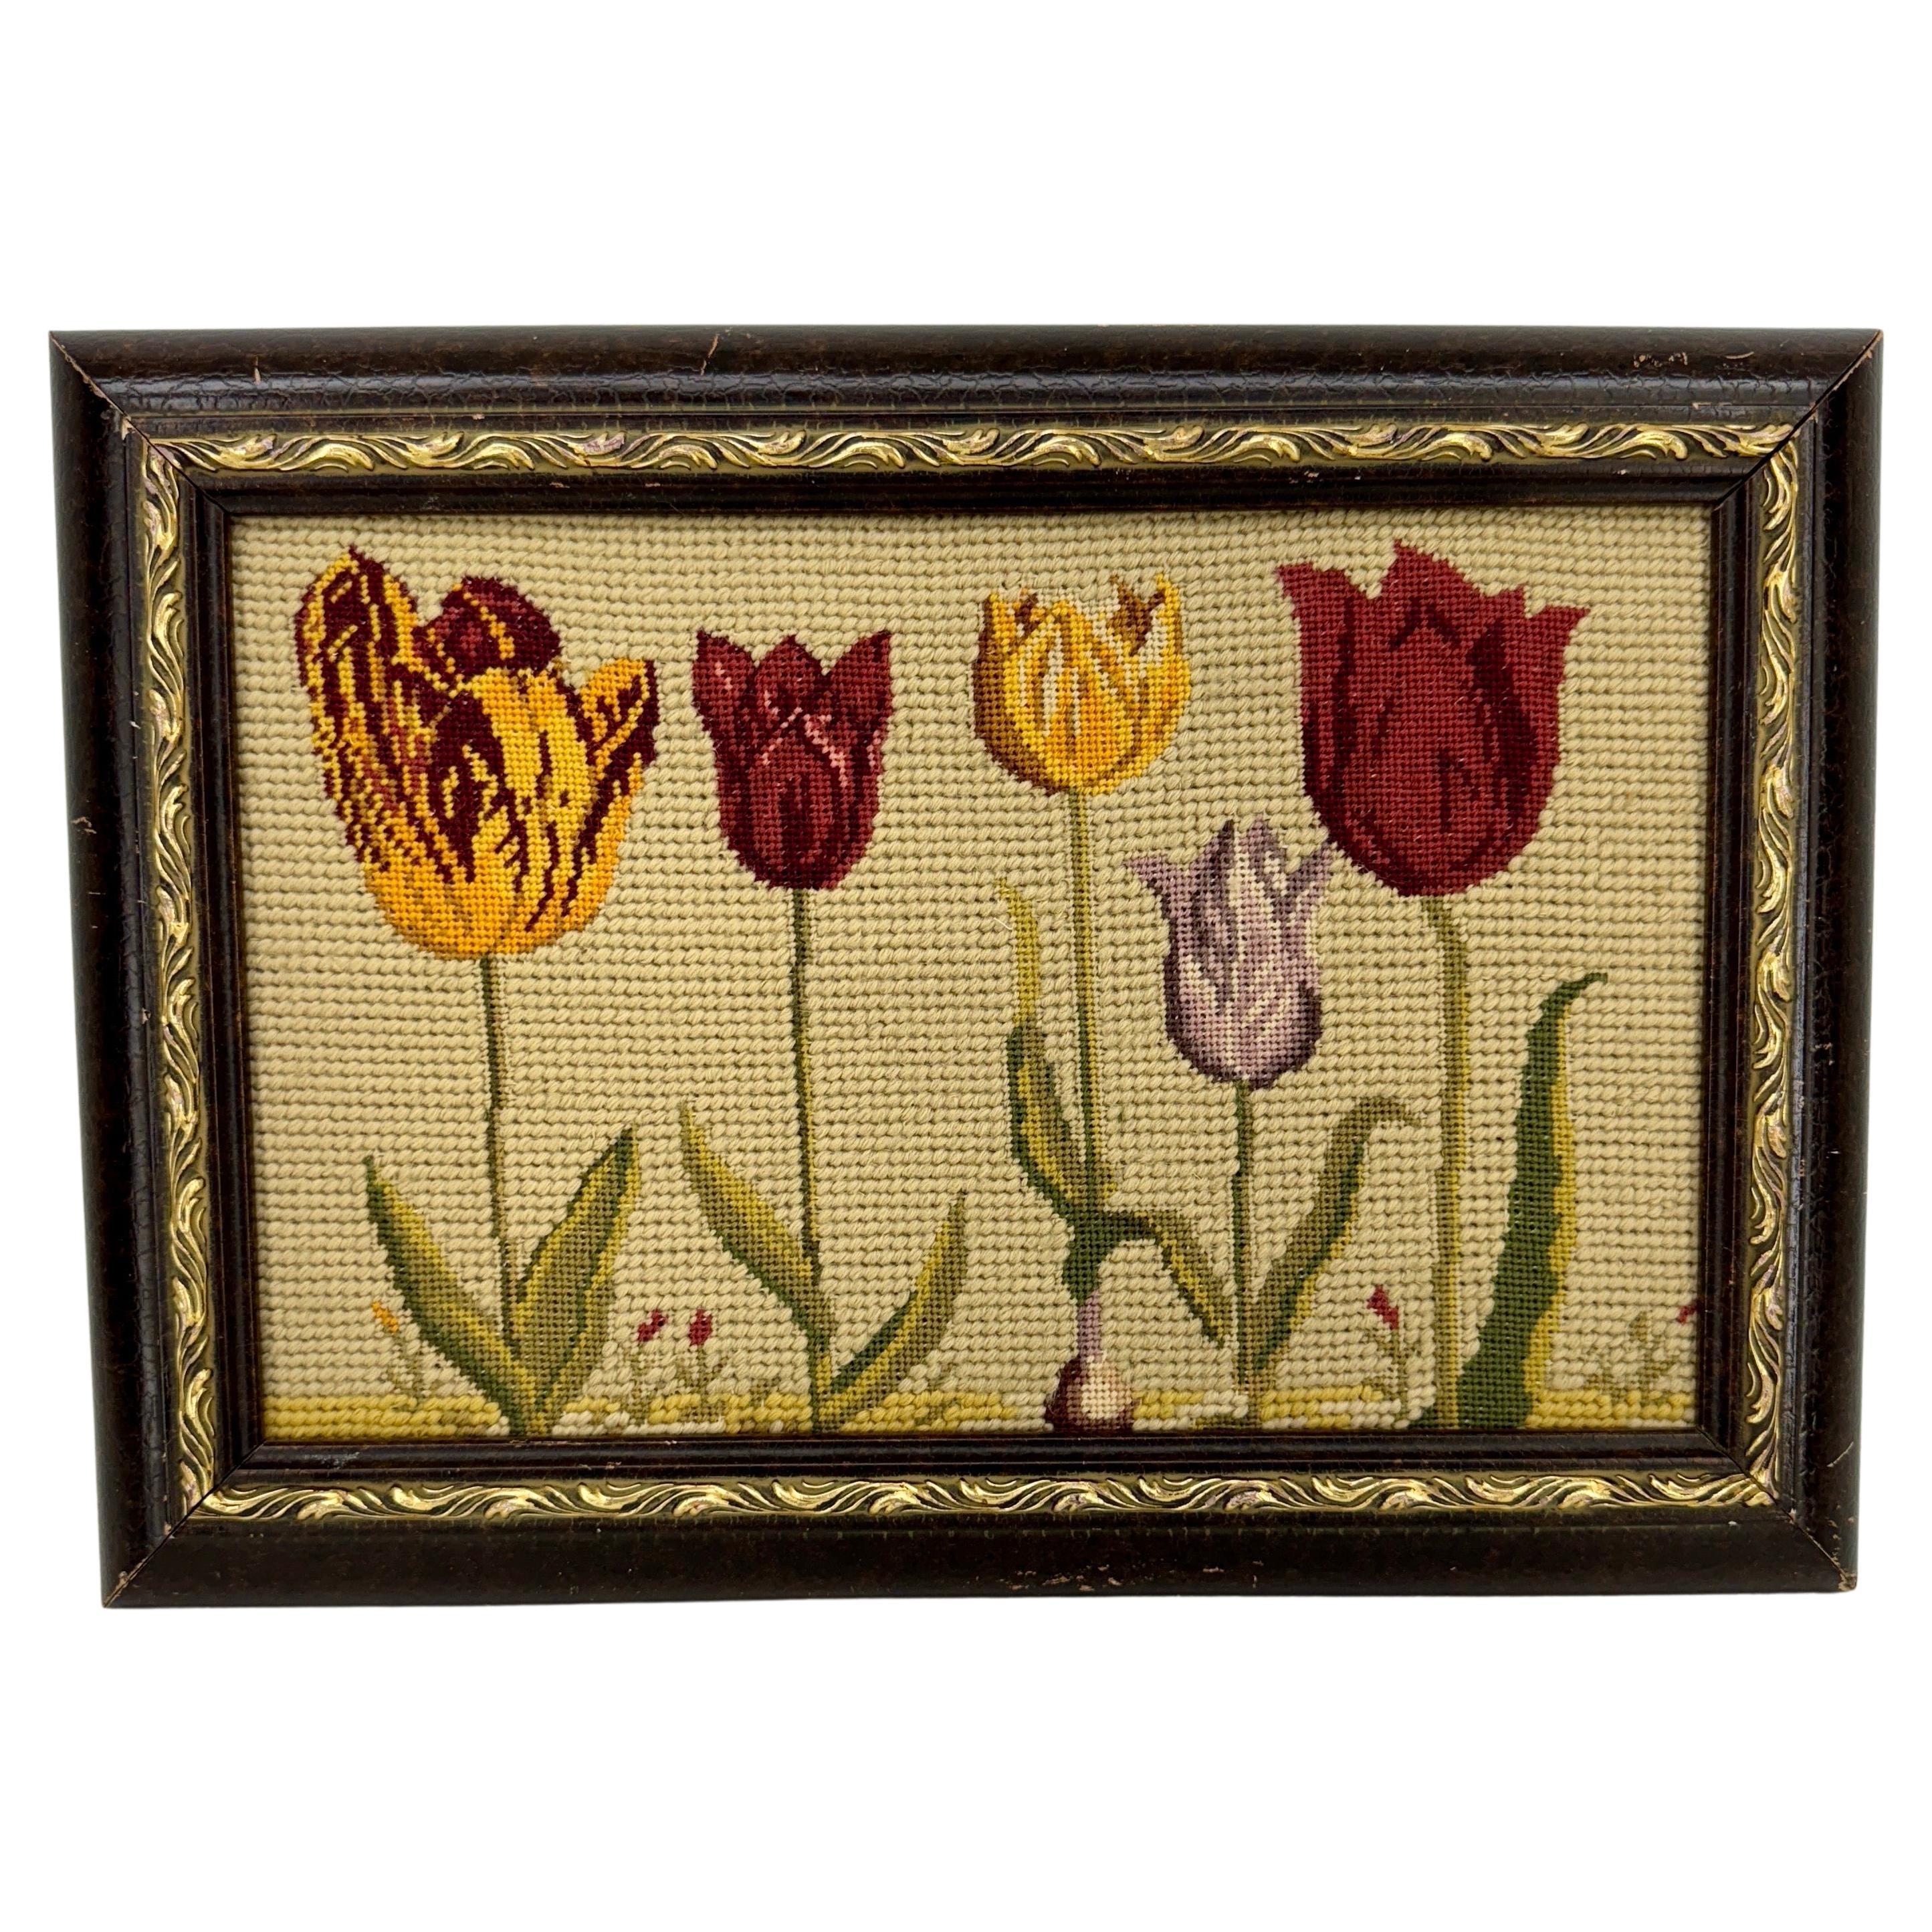 Chelsea Textiles Original Needlepoint Tulip Artwork In Red White and Yellow For Sale